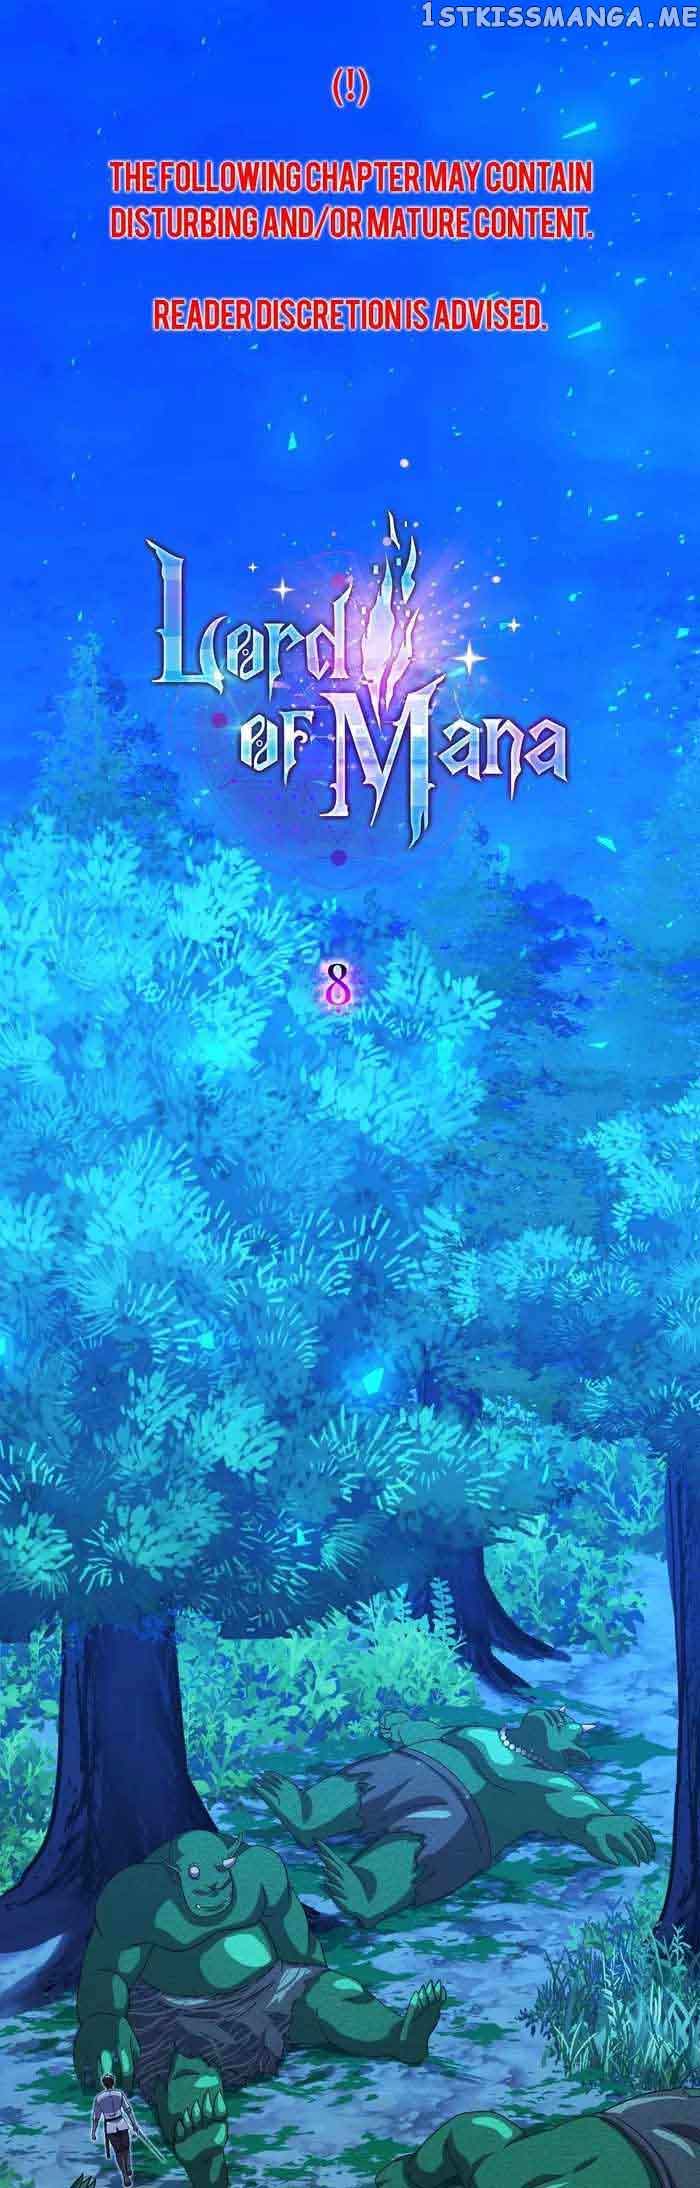 Lord of Mana chapter 8